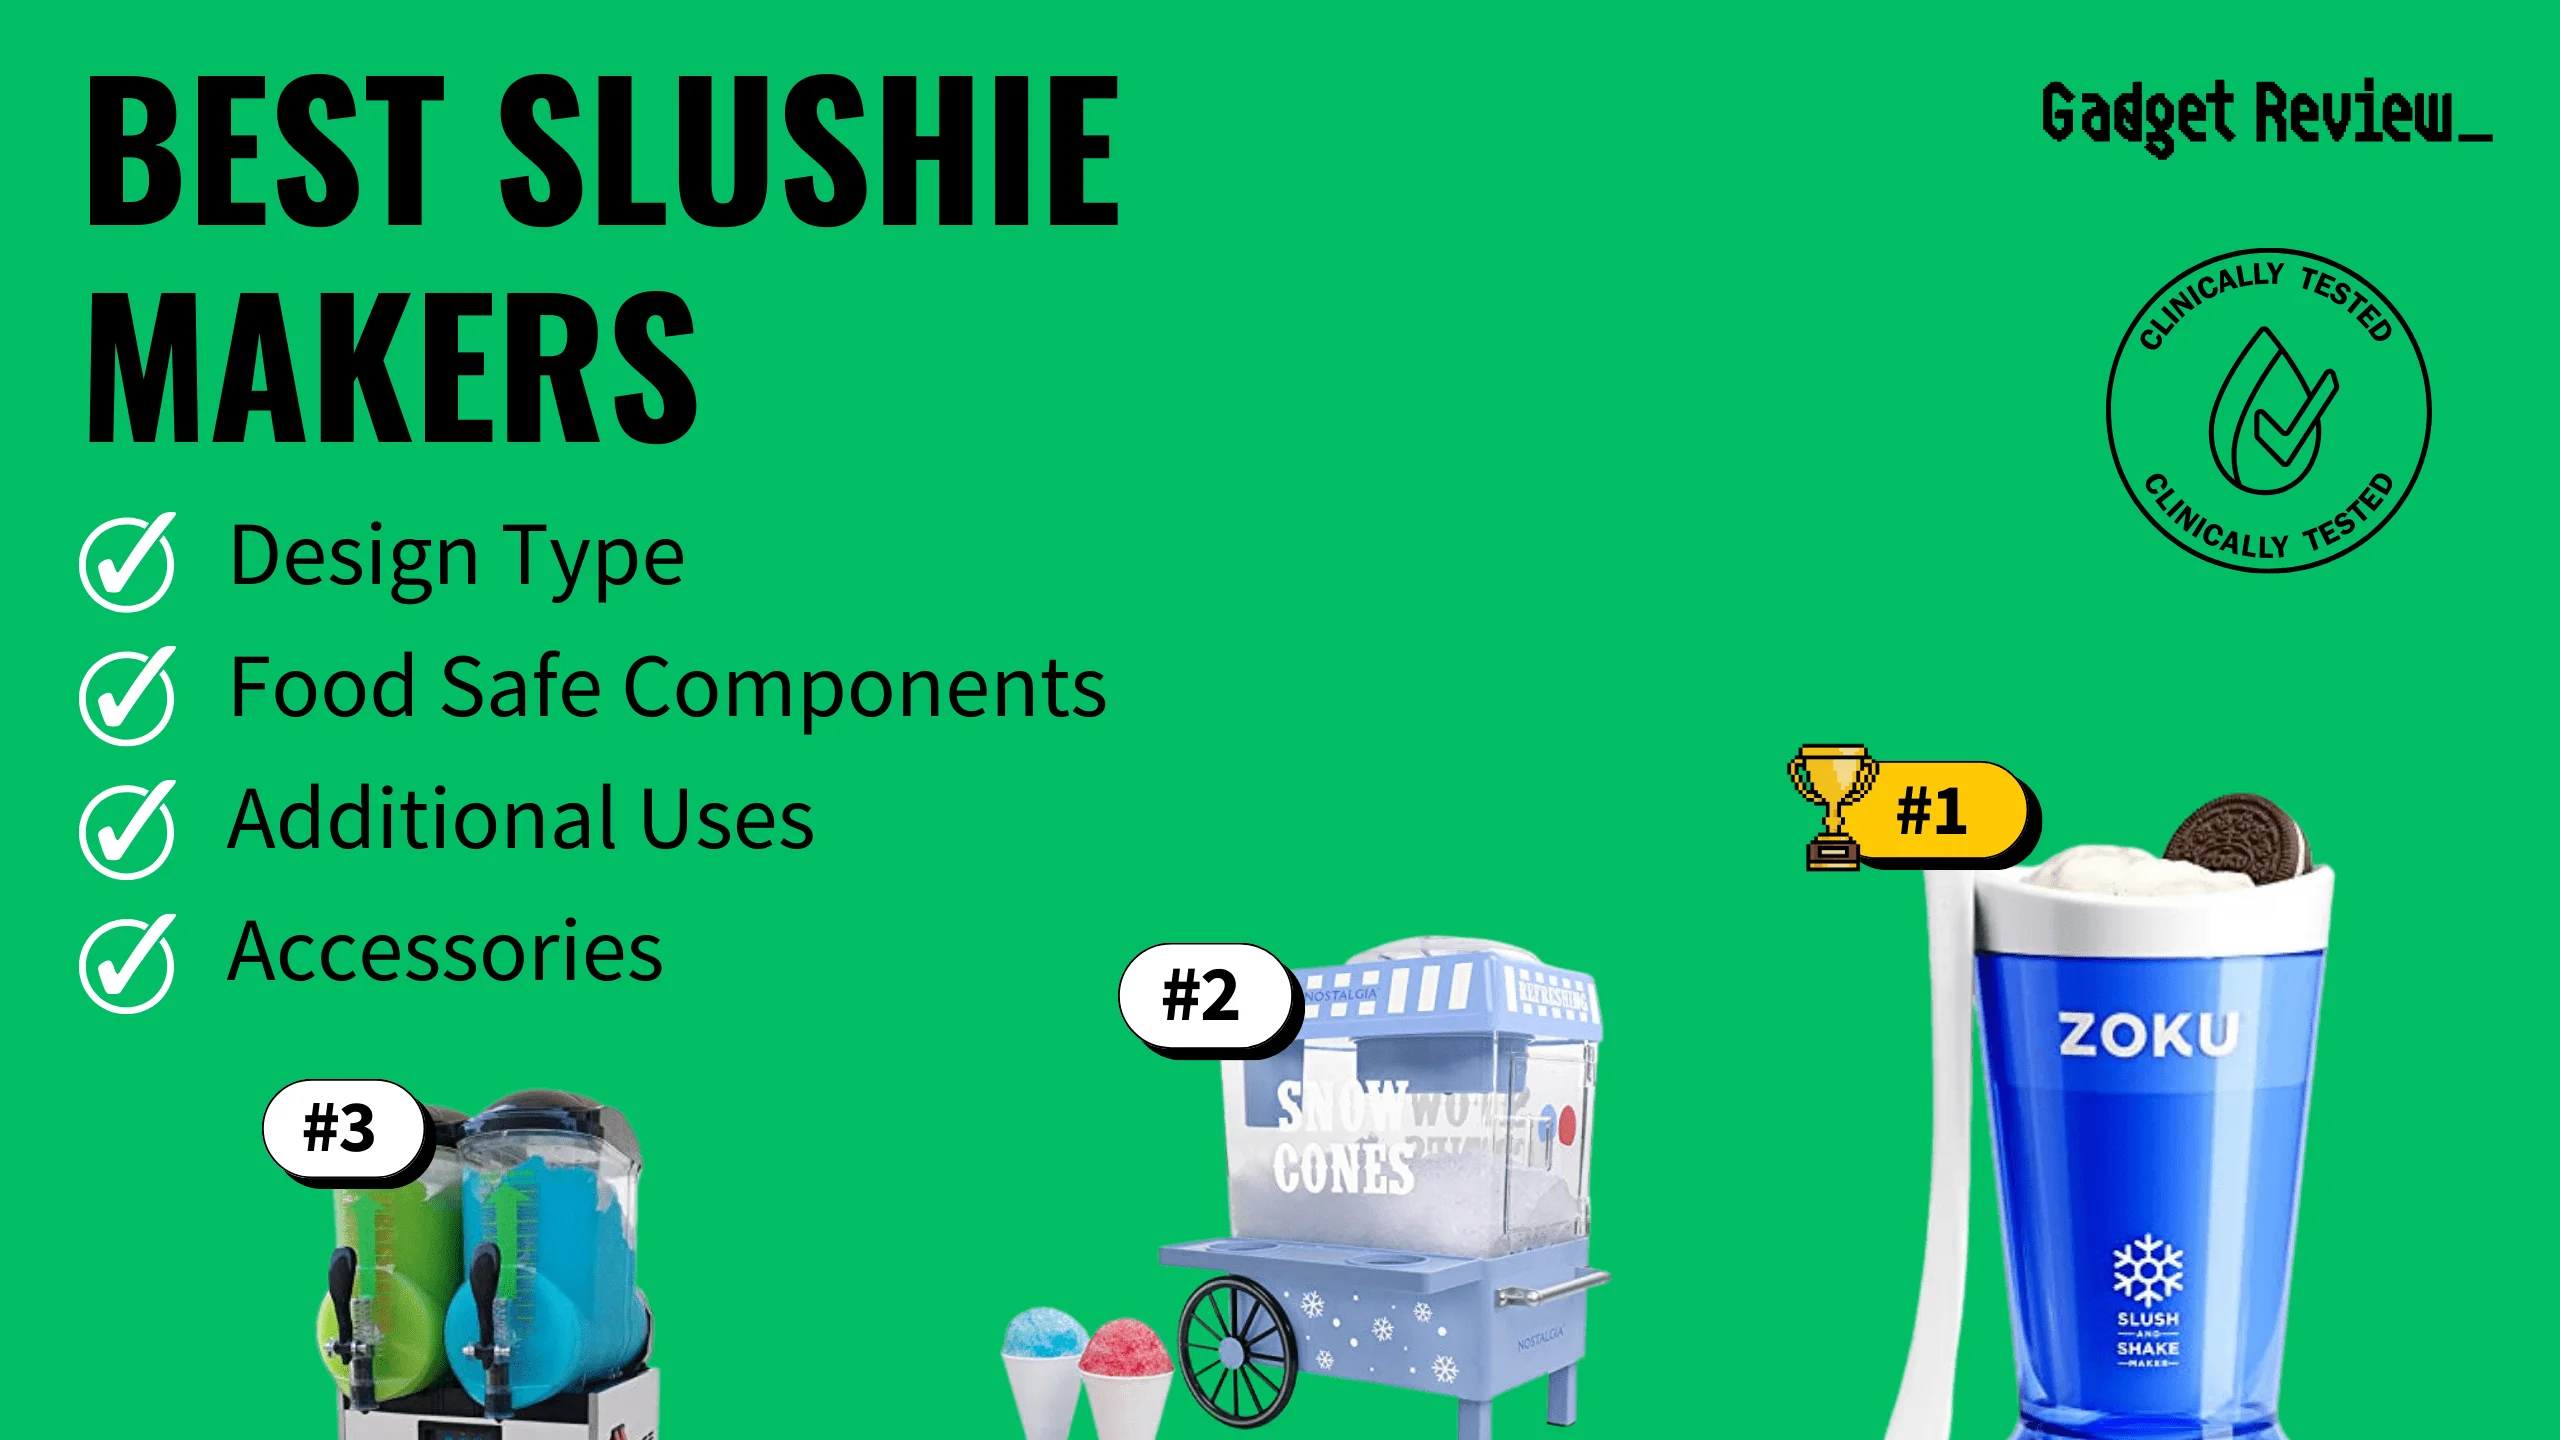 best slushie makers featured image that shows the top three best kitchen product models